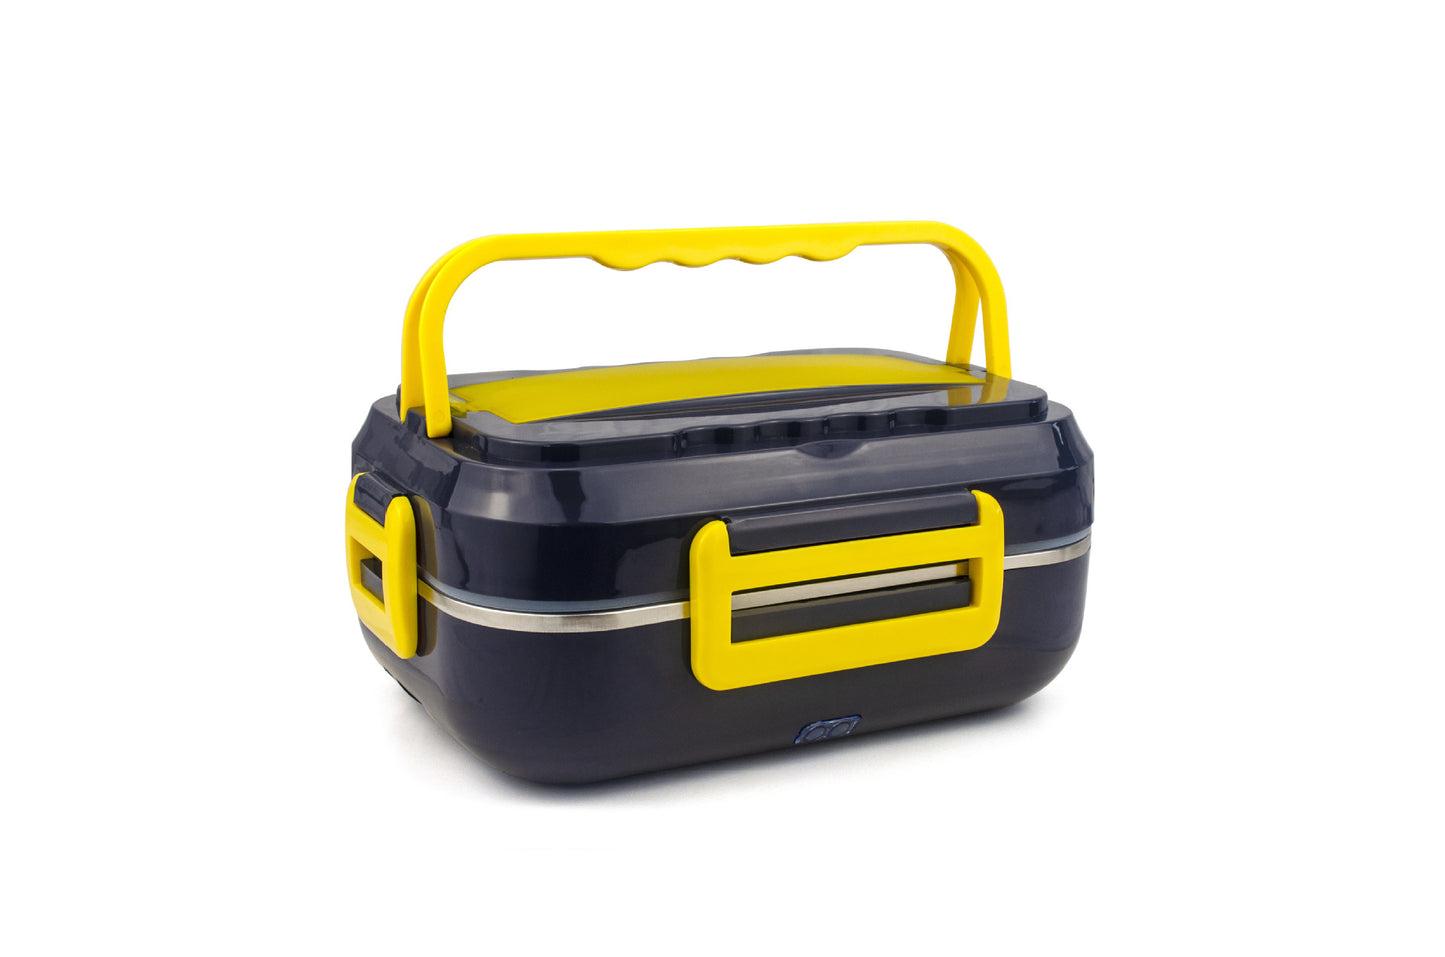 Heater Portable Electric Lunch Boxes